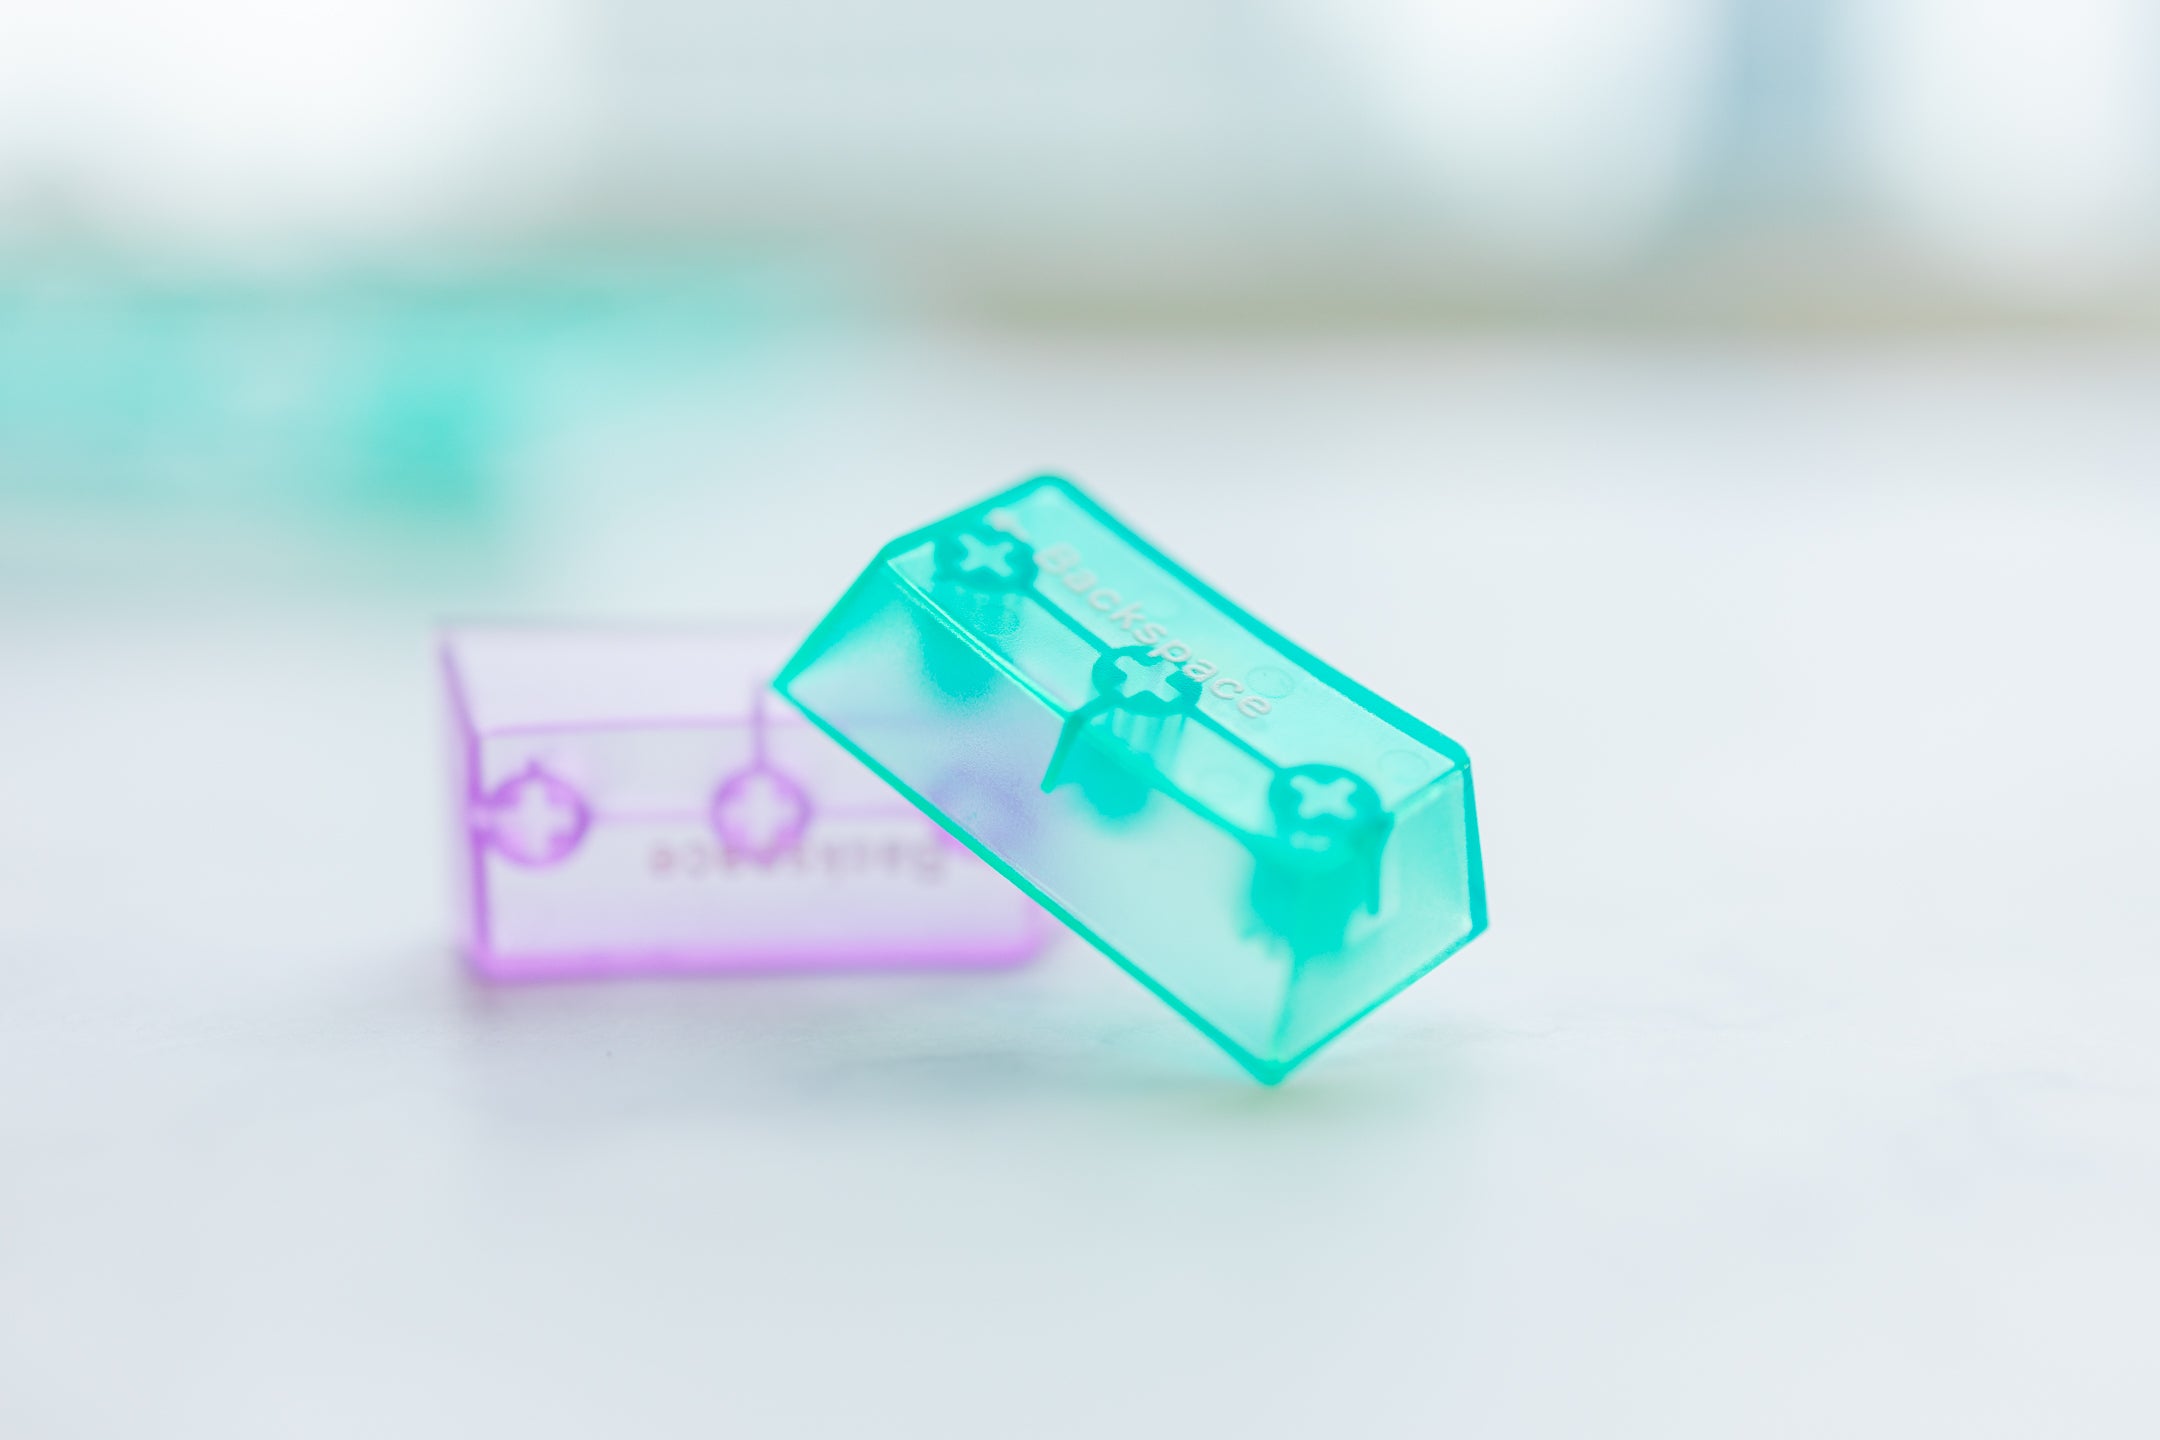 [In Stock] LeleLab Crystal Color Clear ABS Keycap Sets